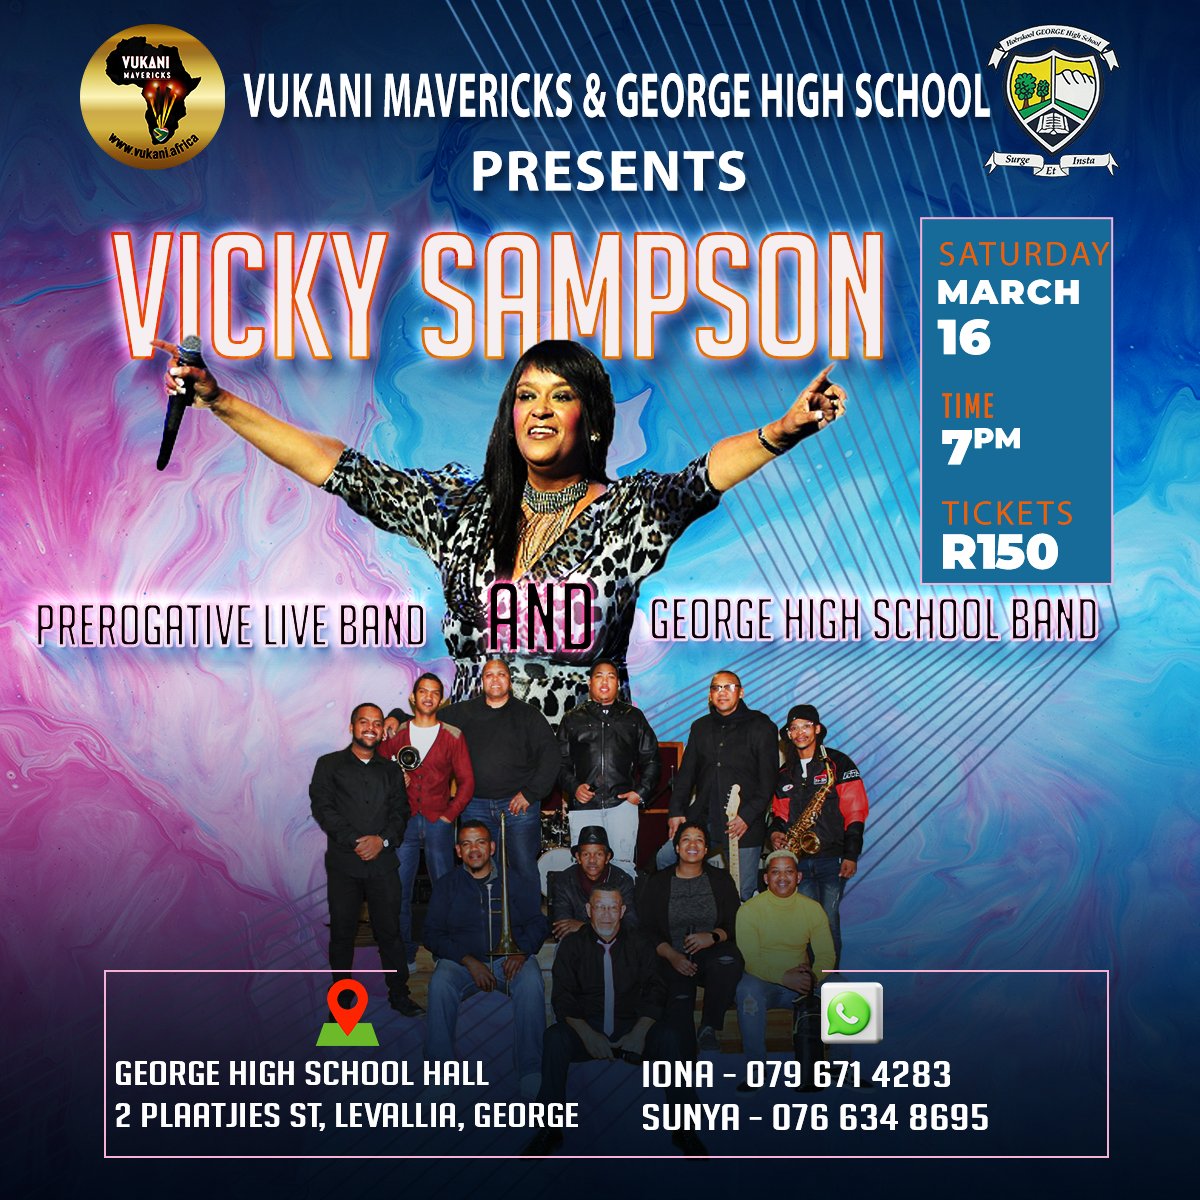 Lovely Mid-Saturday afternoon reflections, music & updates on a special event in George, SOUTH AFRICA this evening with the great #VickySampson LIVE NOW on vm-radio.com In support of #fundraising for the George High School. @ionabiona @PeterHerring @CormacRussell